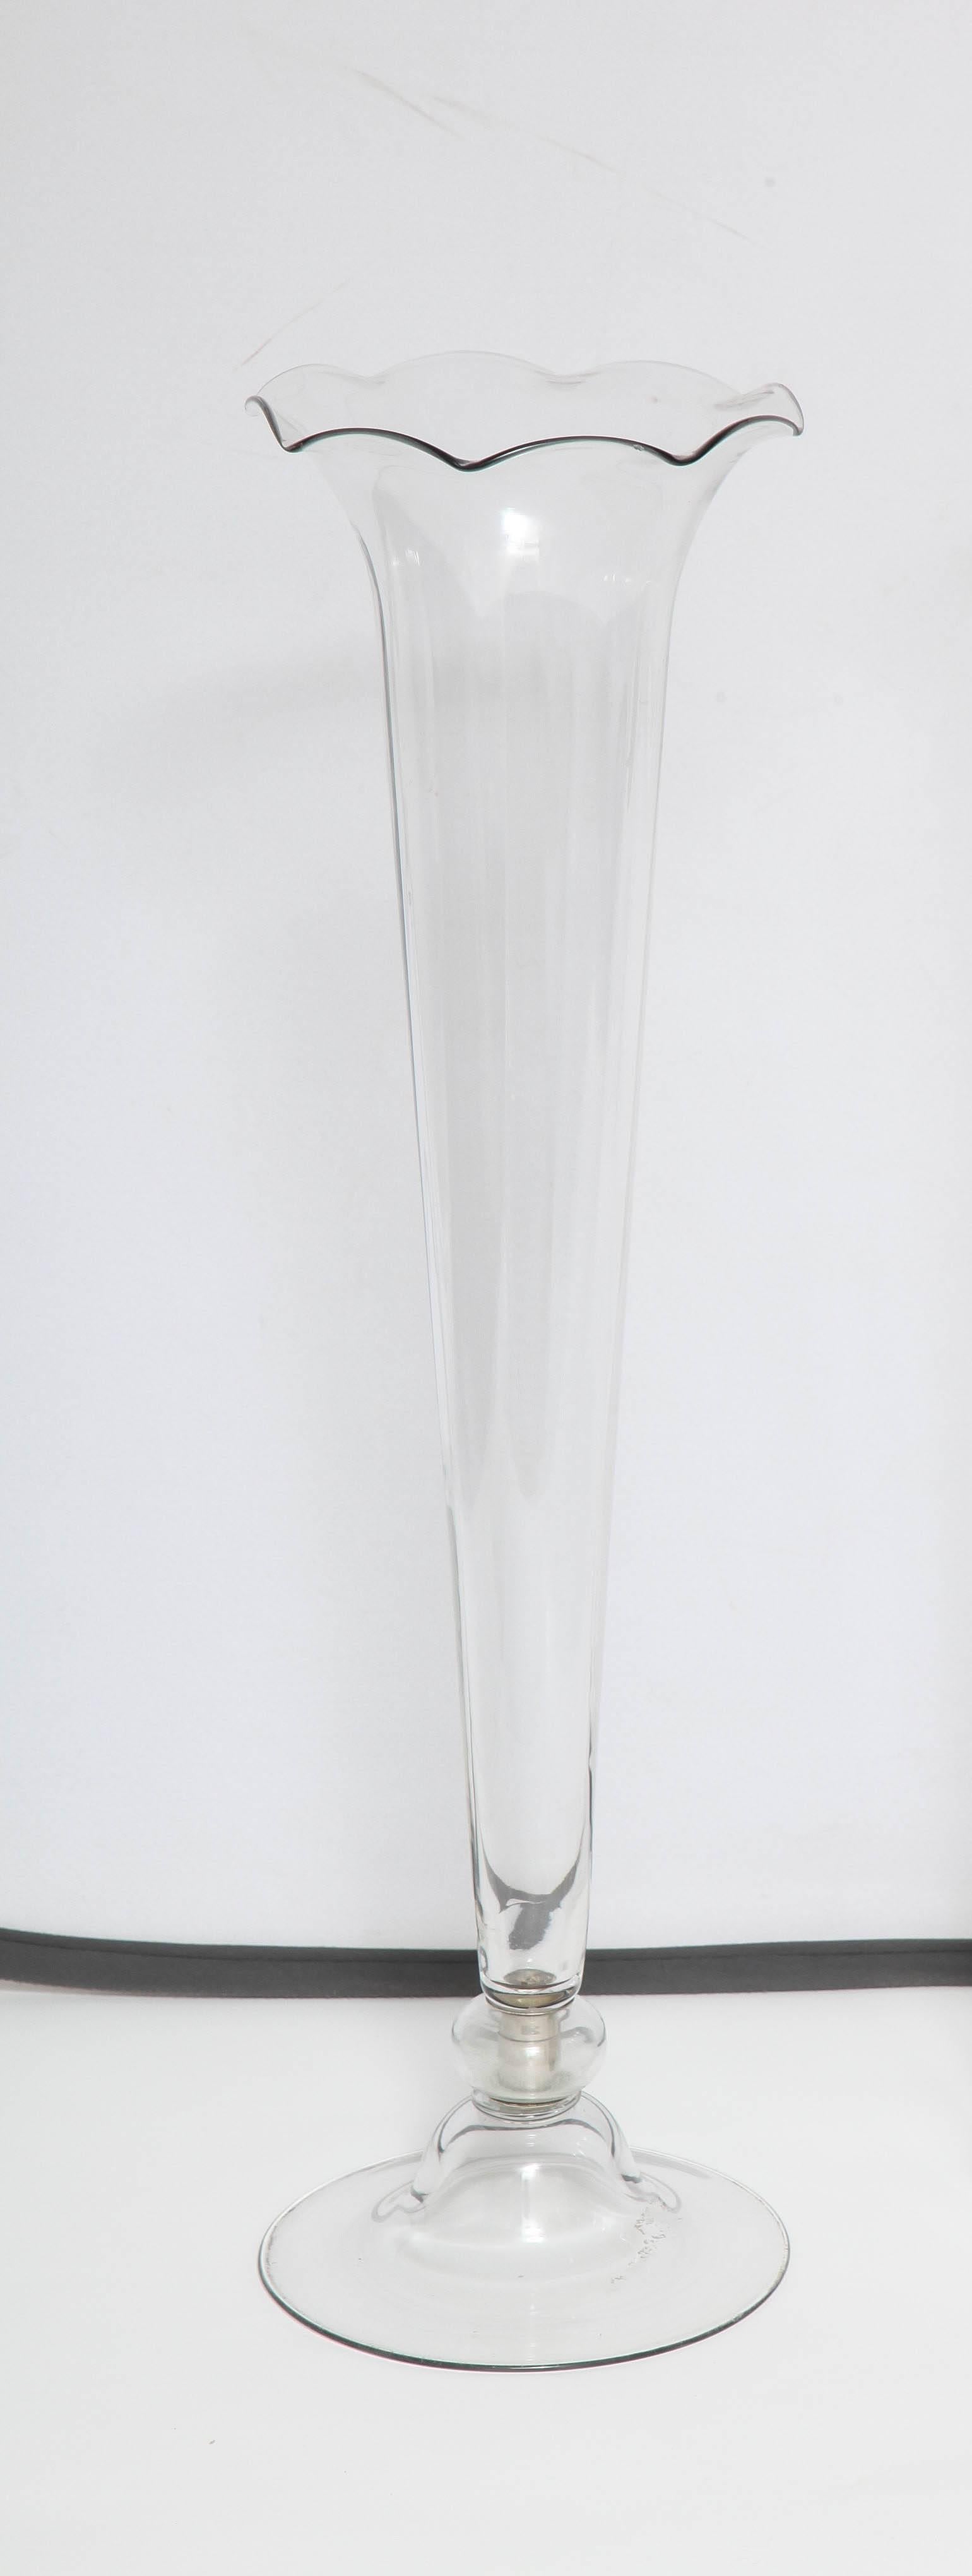 This vase is a beautiful Second Empire lily or bud vase in a Classic trumpet shape measuring 35